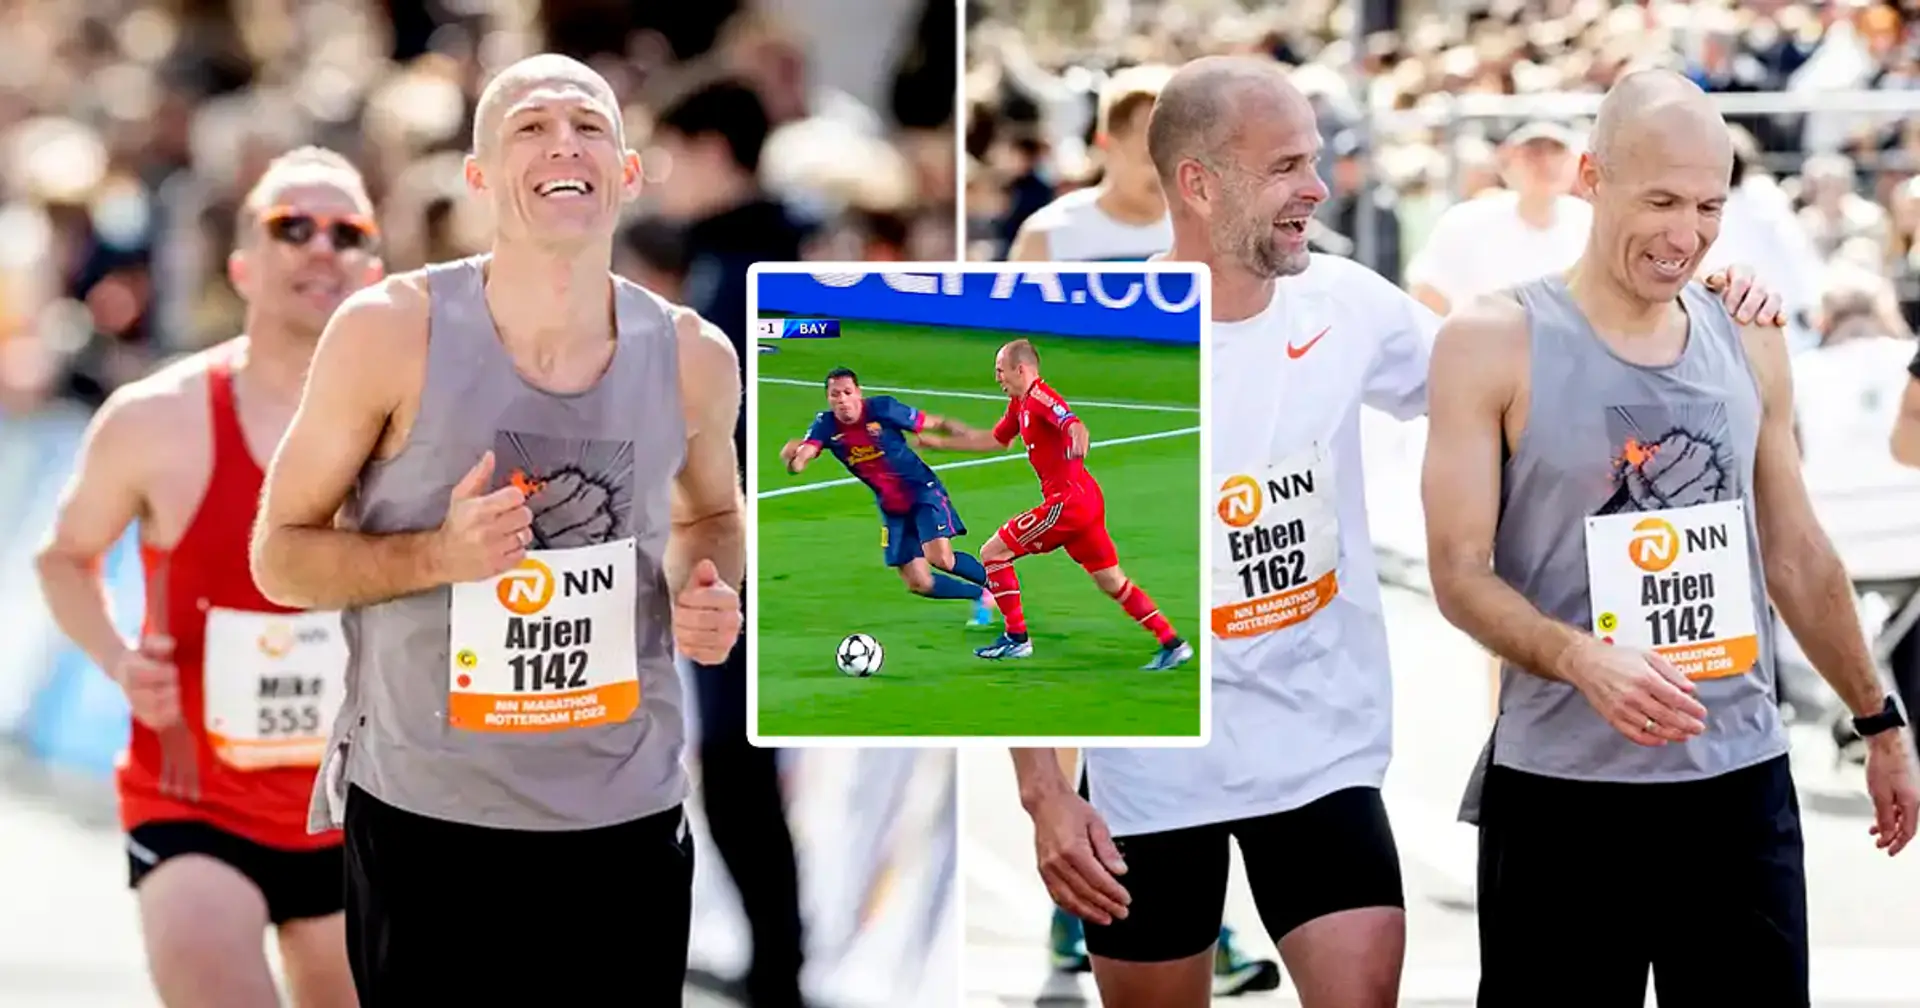 Arjen Robben completes his first marathon less than year after retirement, shows excellent time